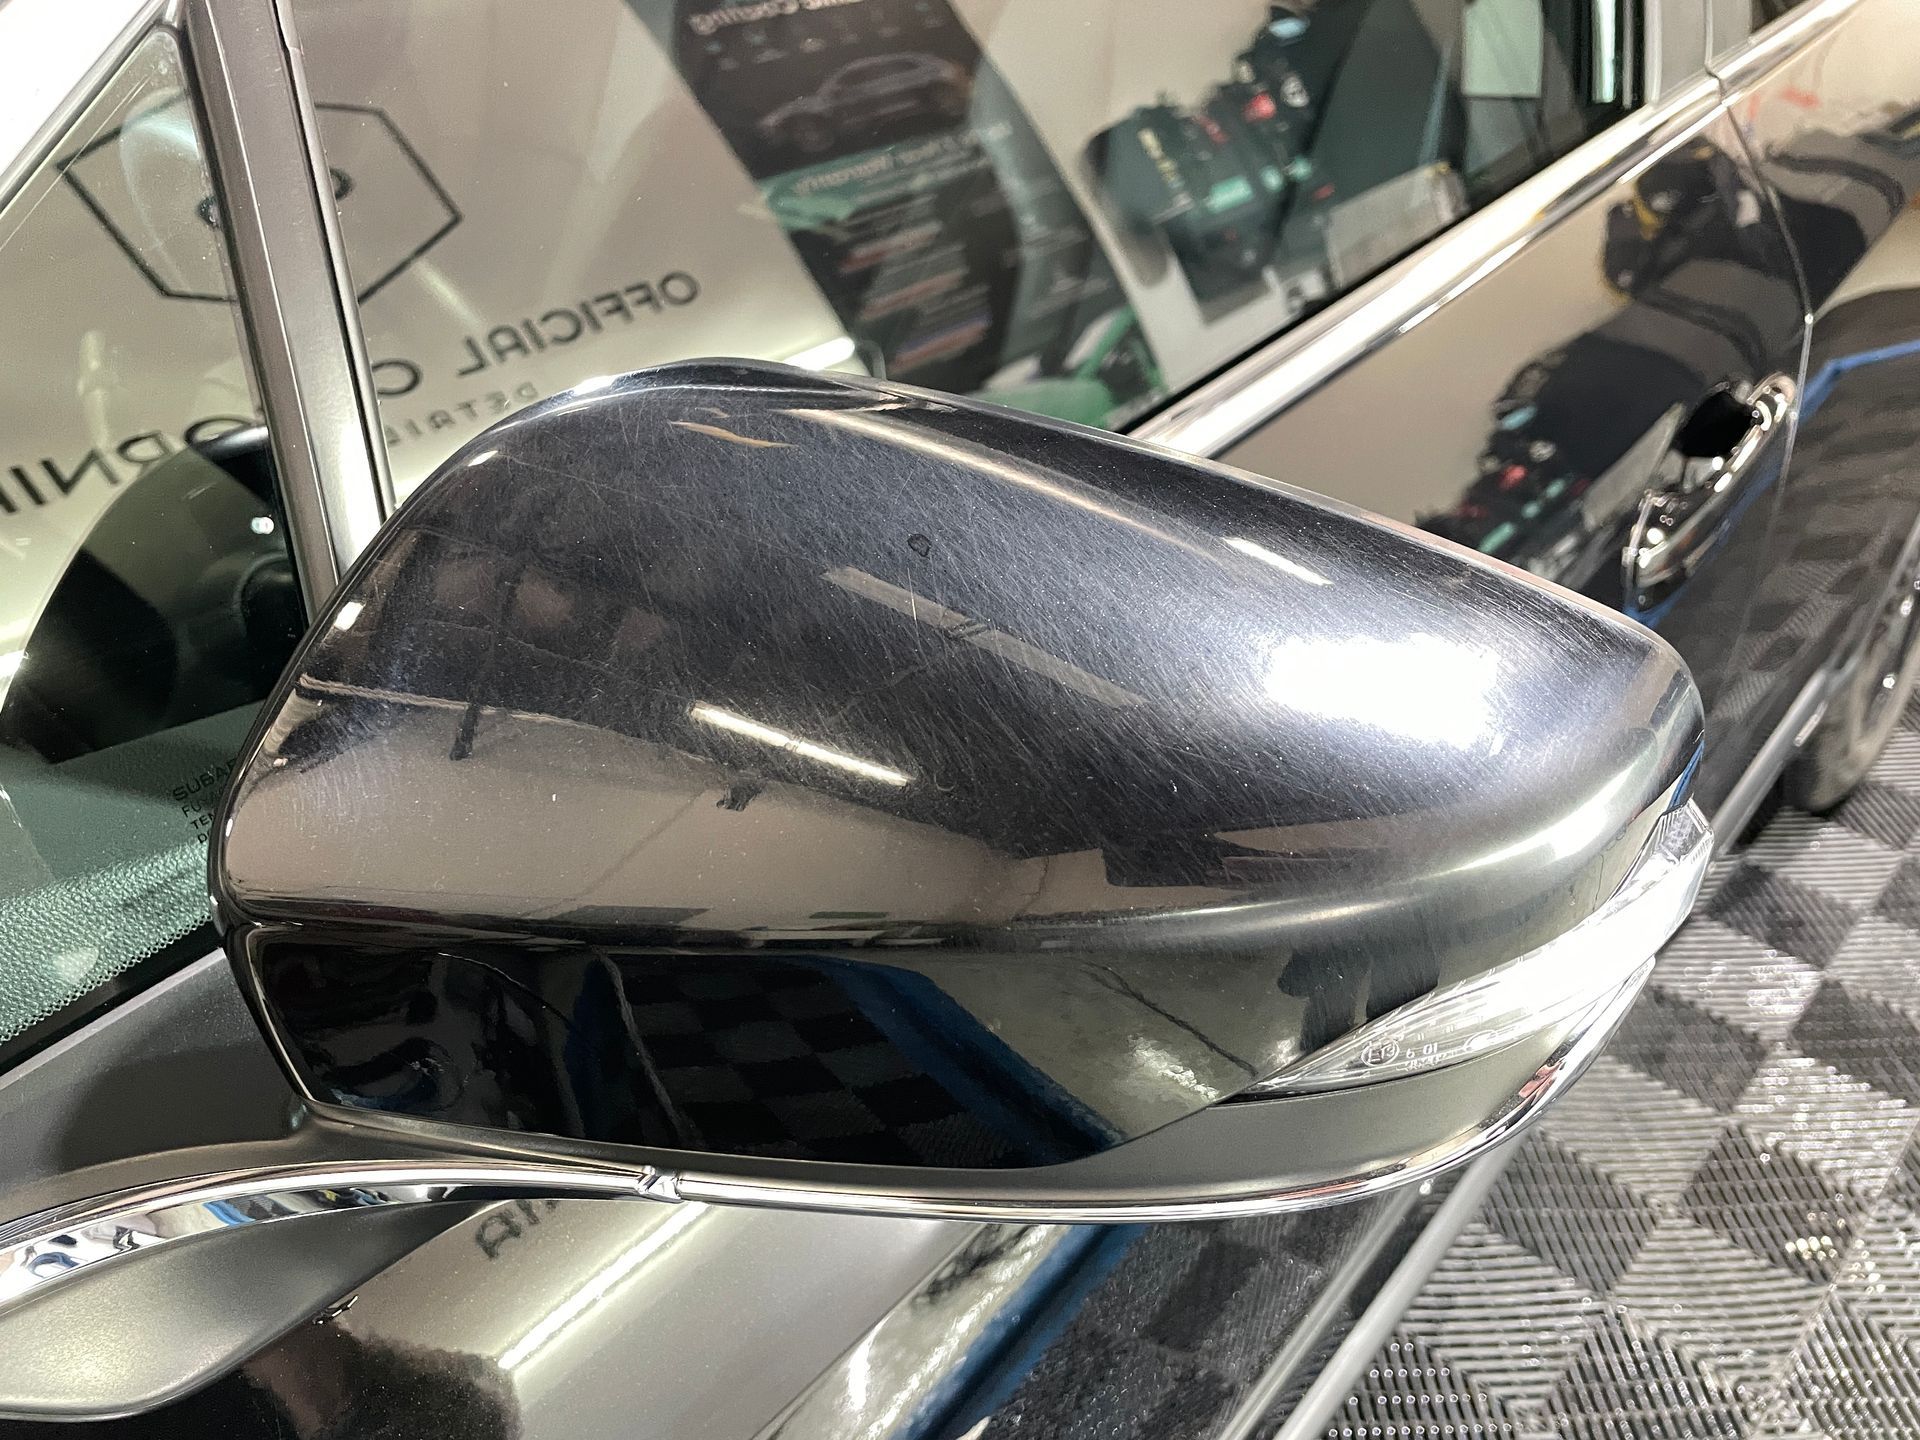 A close up of a side view mirror on a car.